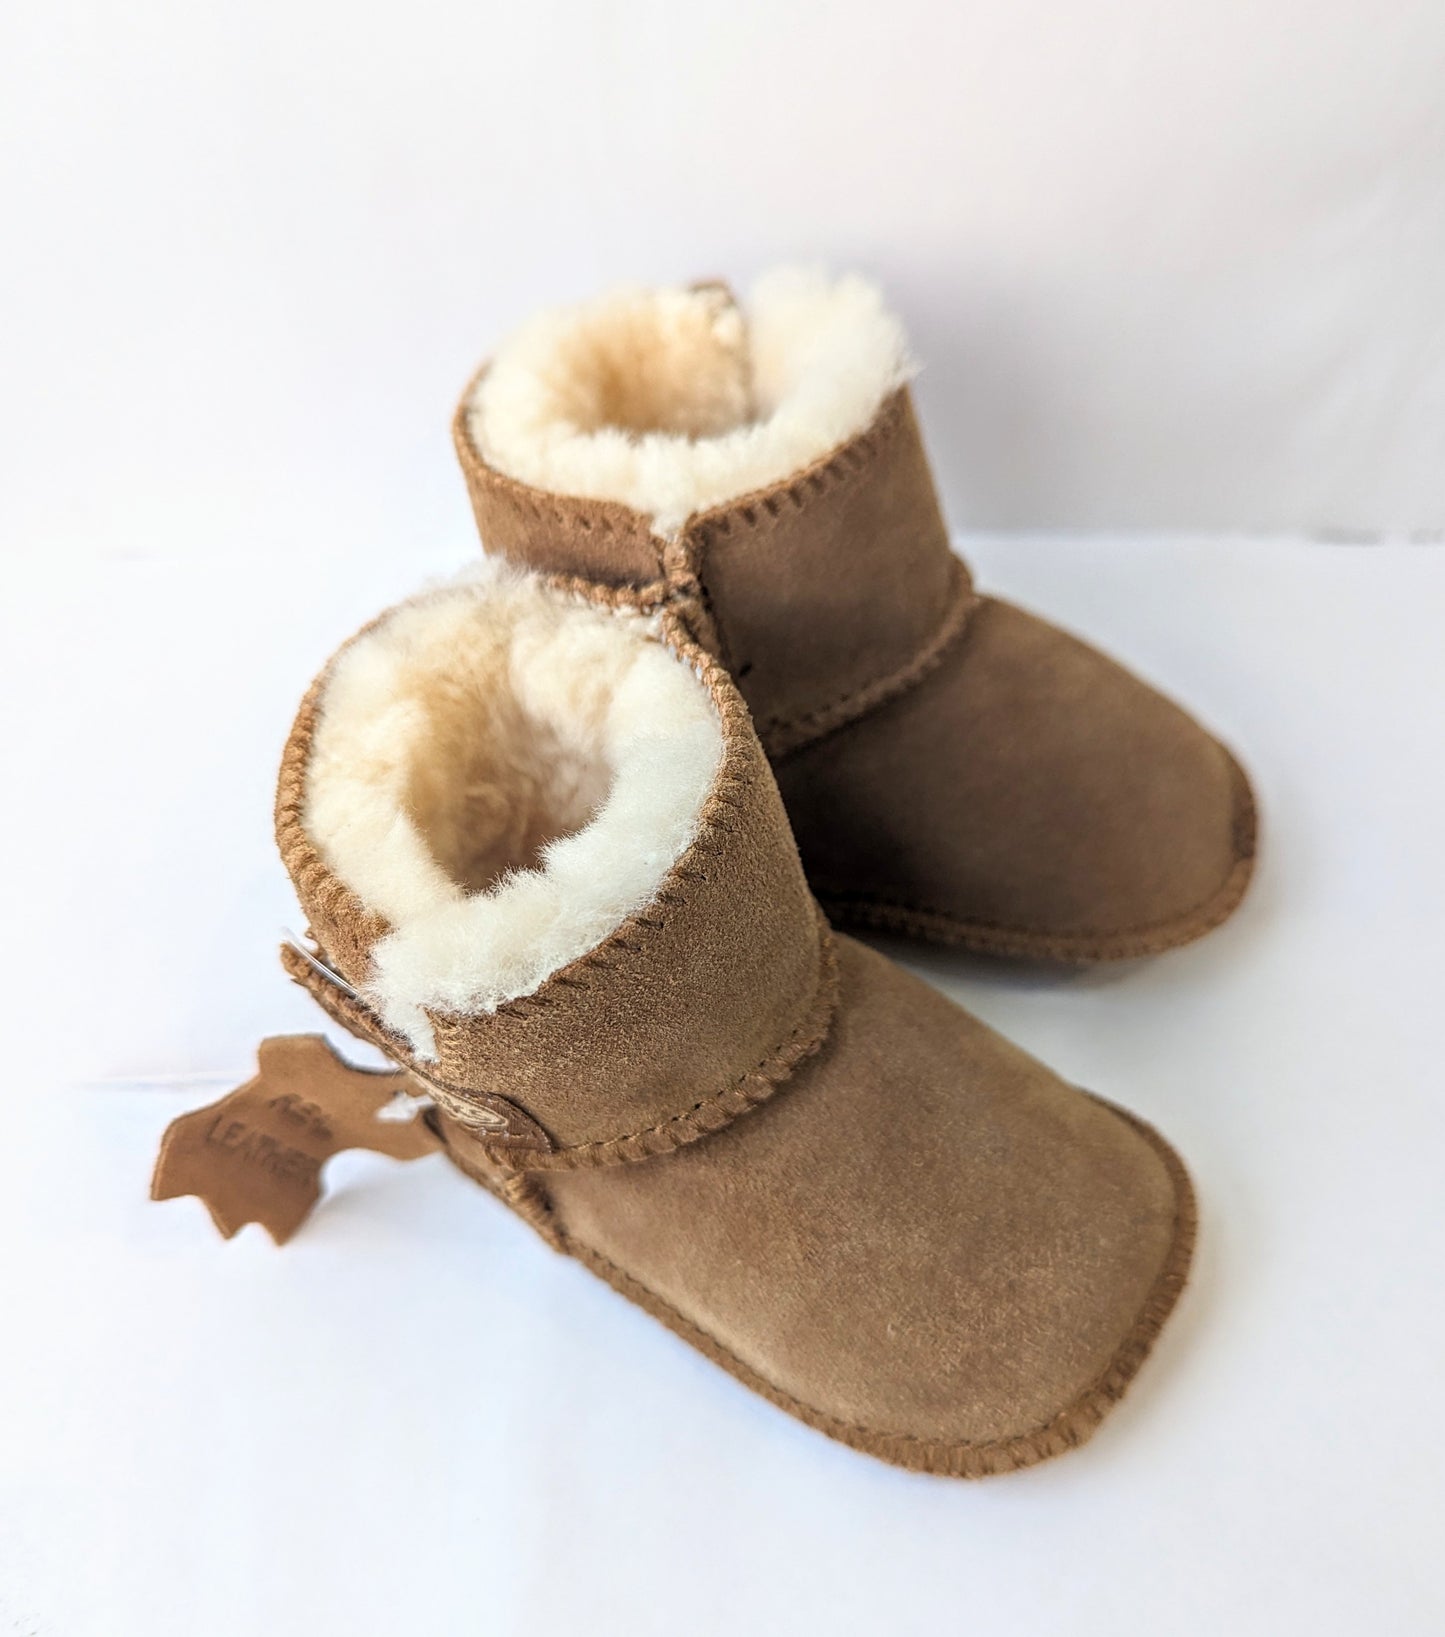   A pair of unisex pull on warm lined slipper boots by Chipmunks, style JoJo, in tan. View from above.